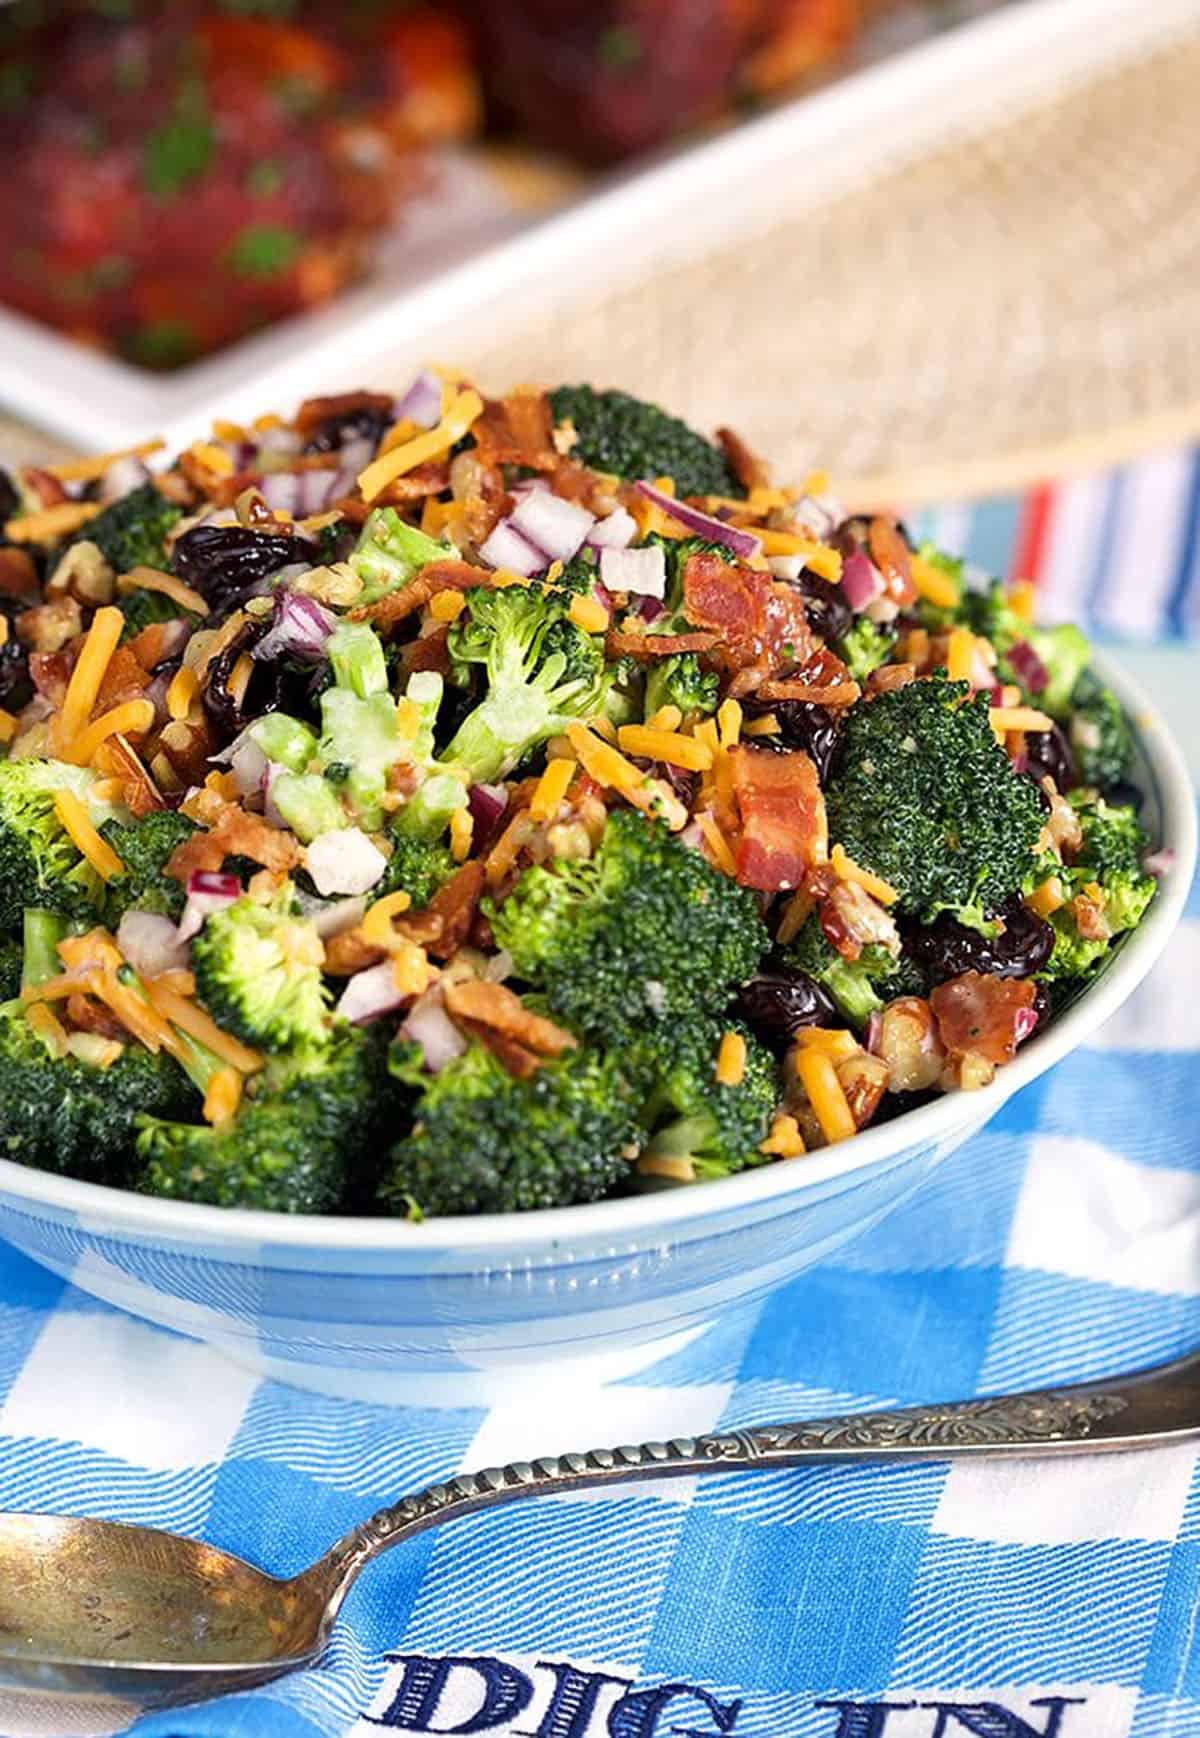 Broccoli Salad in a blue and white bowl.